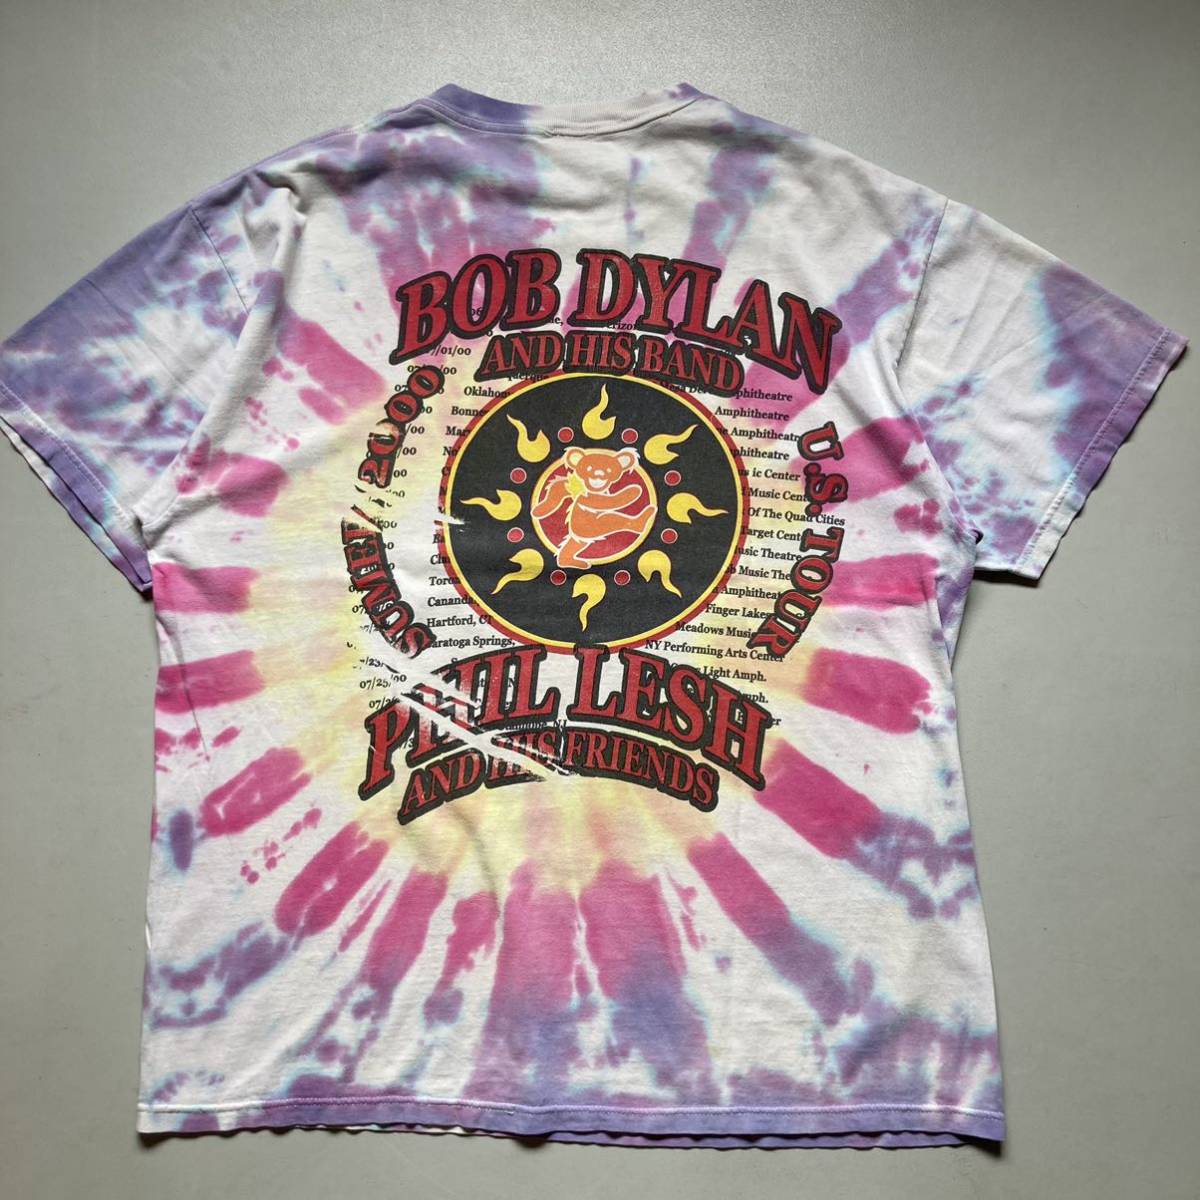 00s Bob Dylan and his band /Phil Lesh and his friends Summer Tour 2000 tie-dye T-shirt タイダイTシャツプリントTシャツ 半袖Tシャツ_画像3